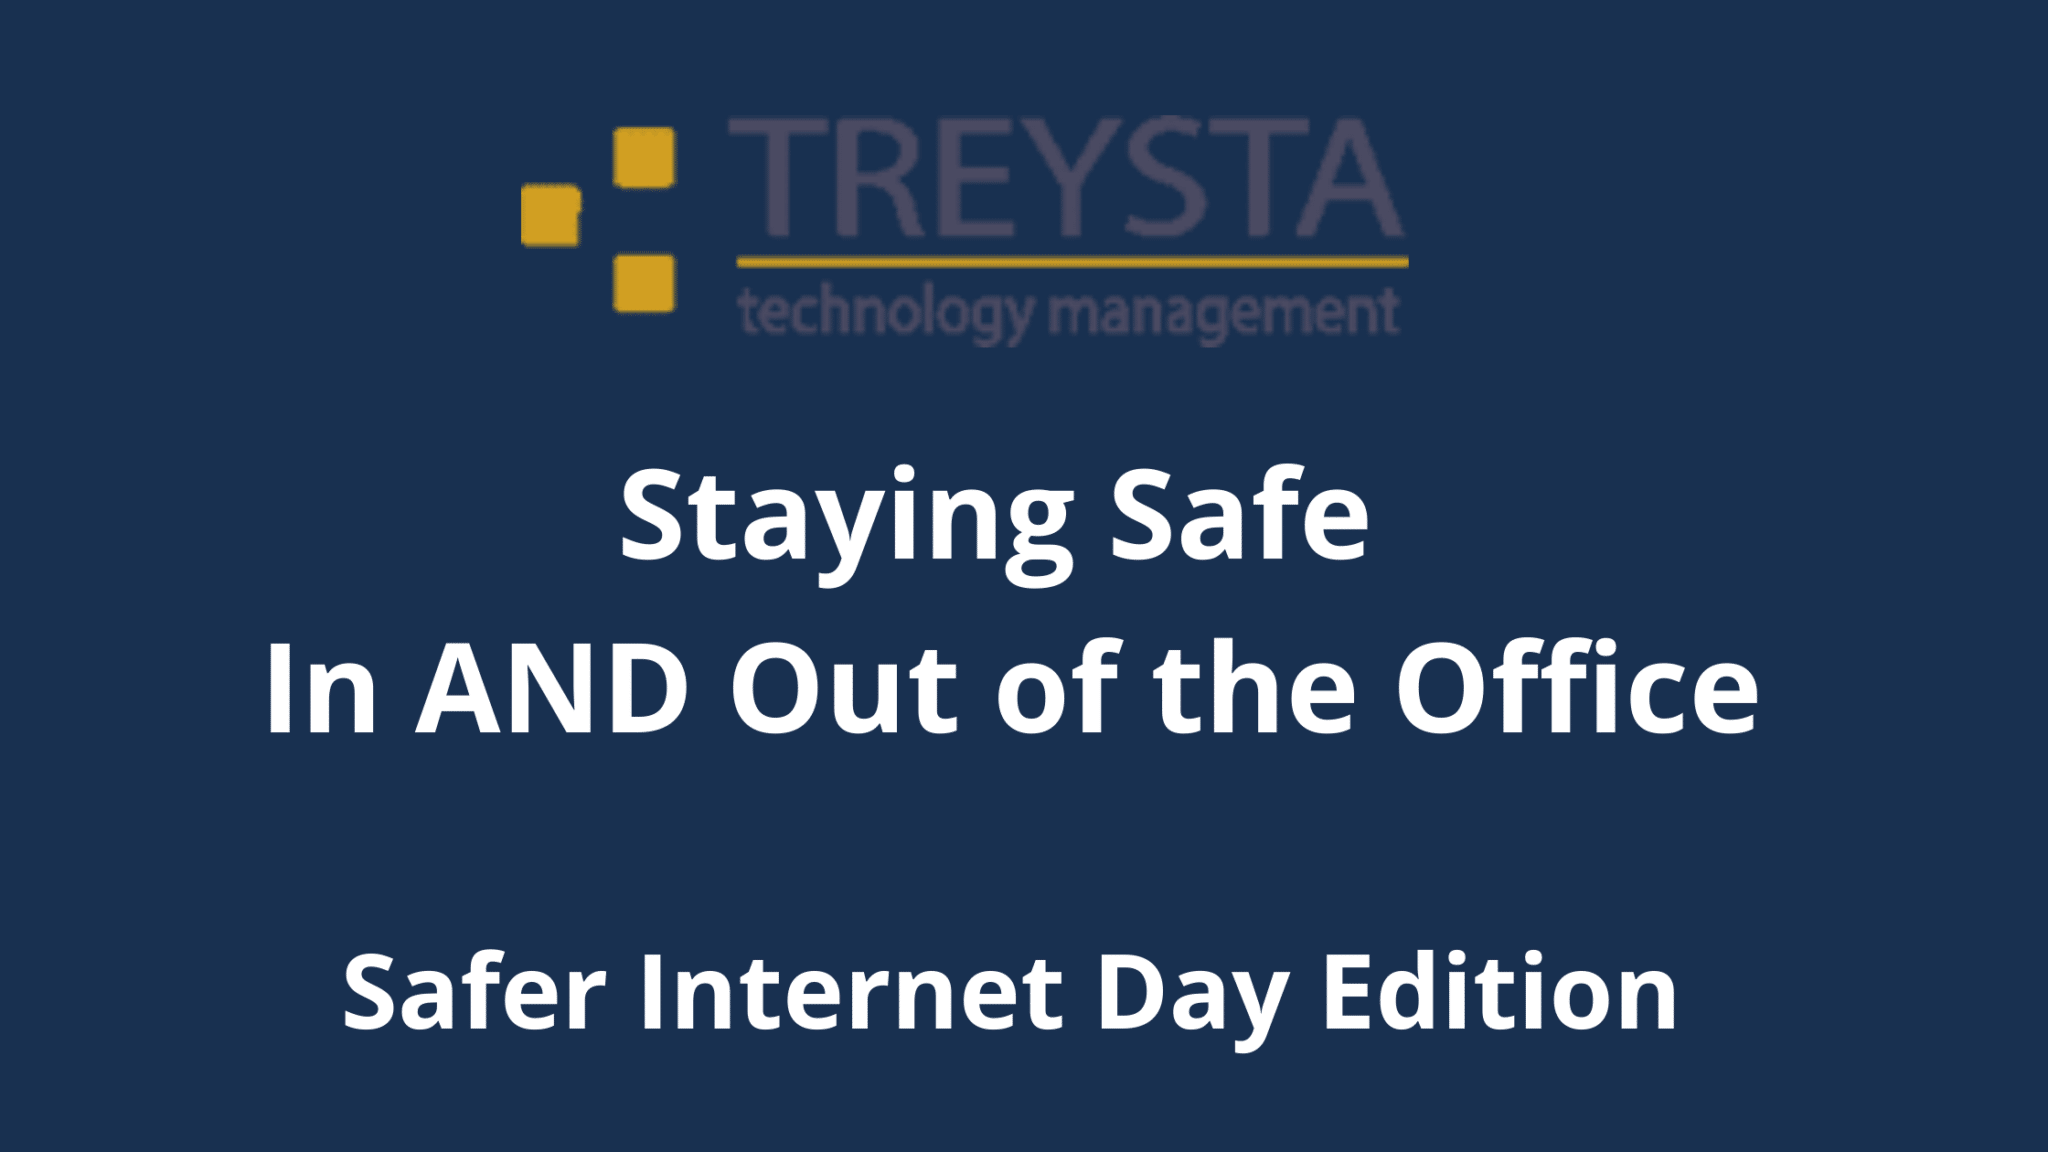 Staying Safe In AND Out of the Office: Safer Internet Day Edition